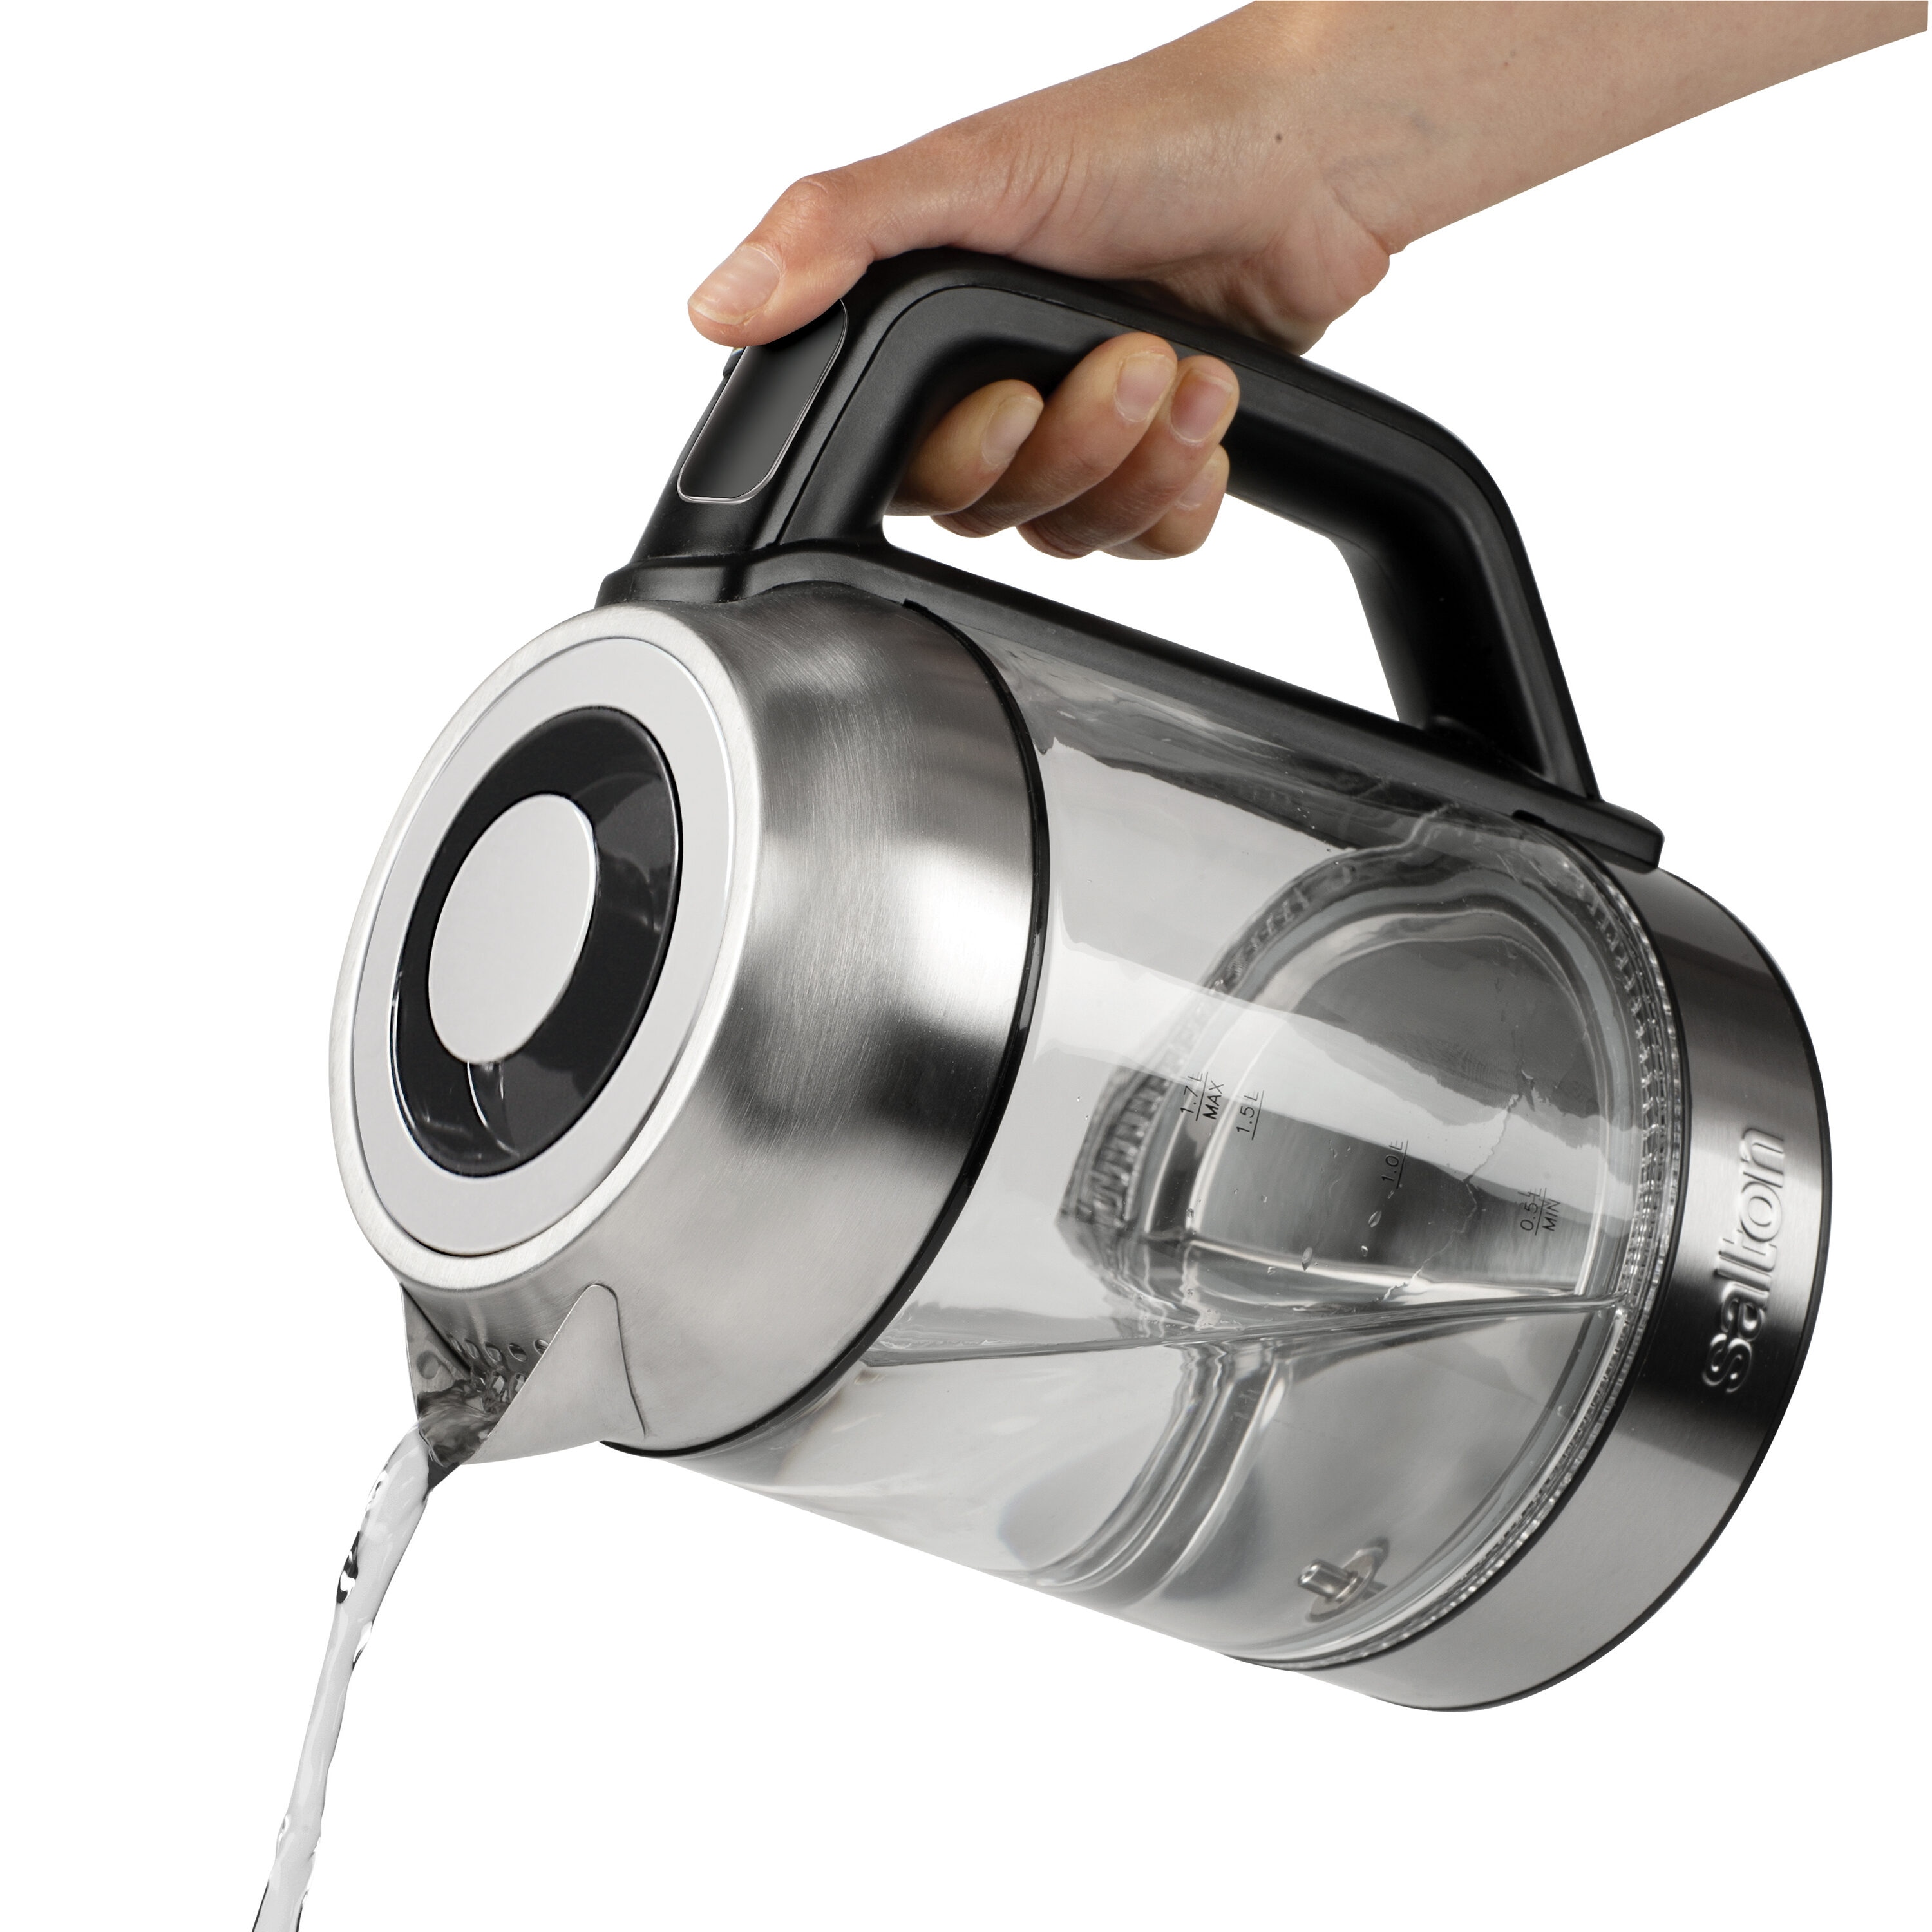 1.7 Liter Electric Dome Kettle - Model 41035